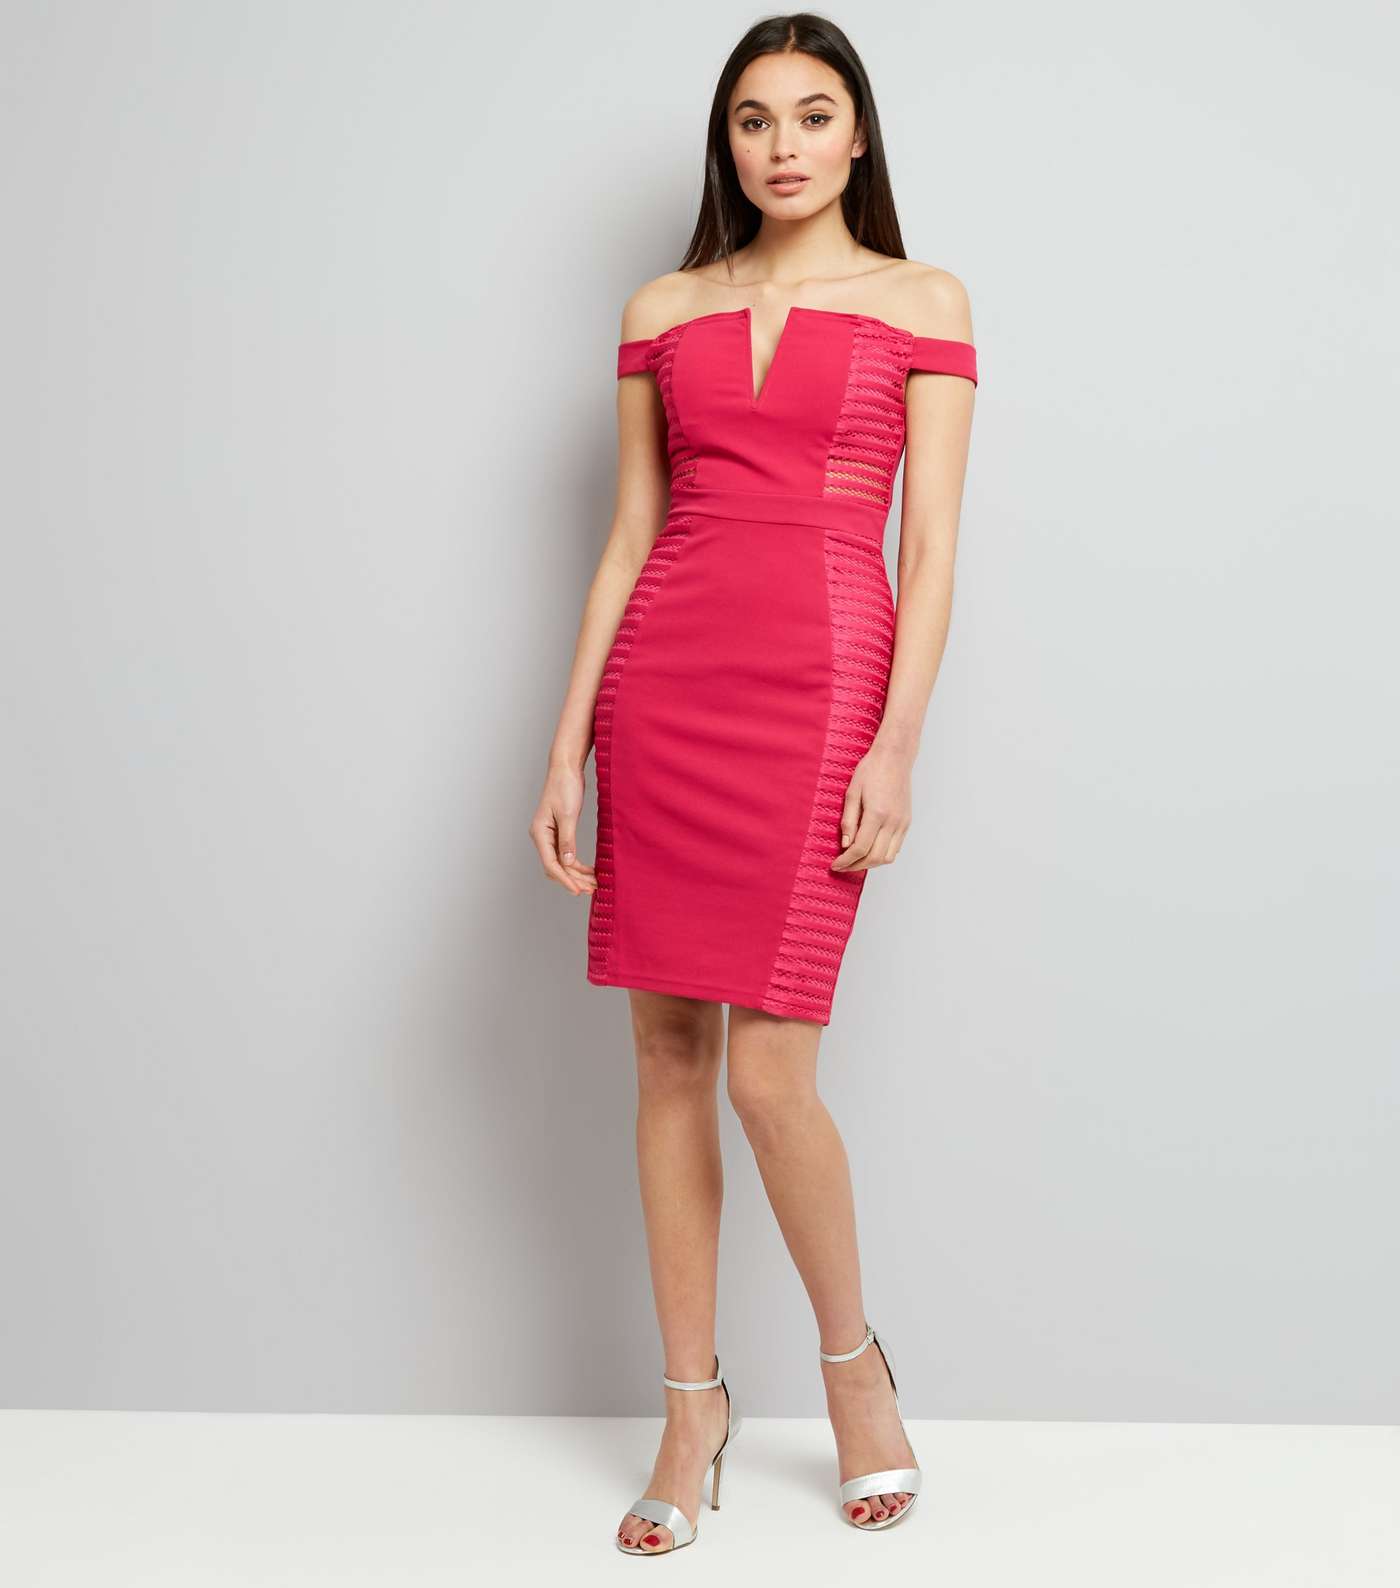 Parisian Bright Pink Cut Out Sides Bodycon Dress  Image 2